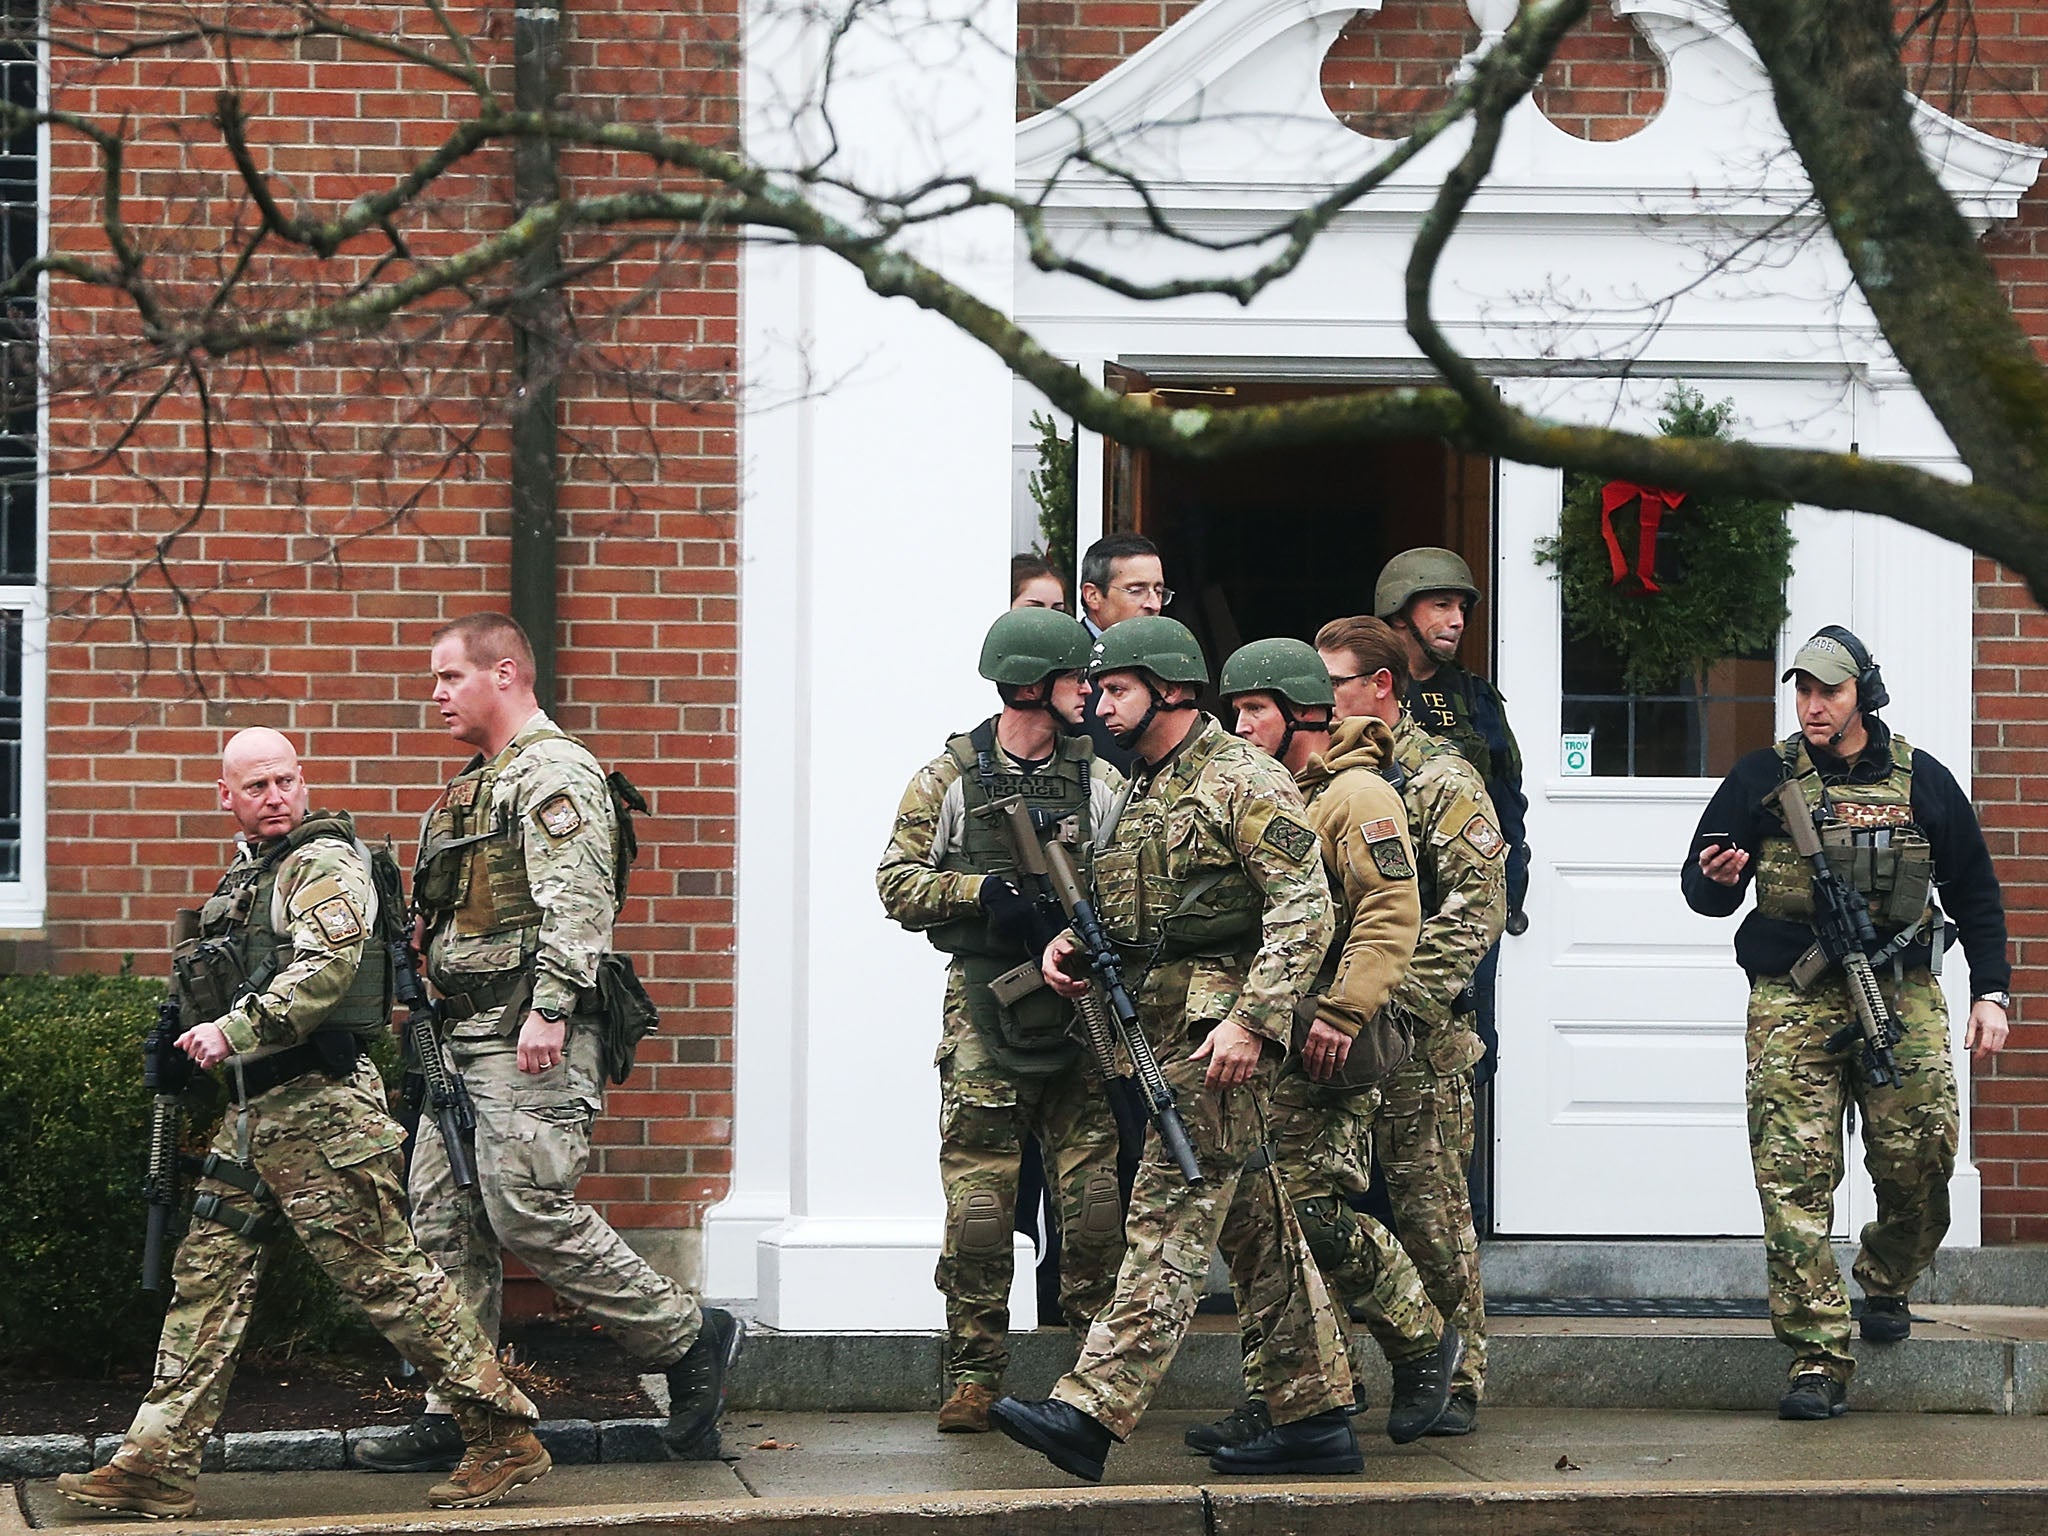 A false alarm in the wake of the Newtown massacre